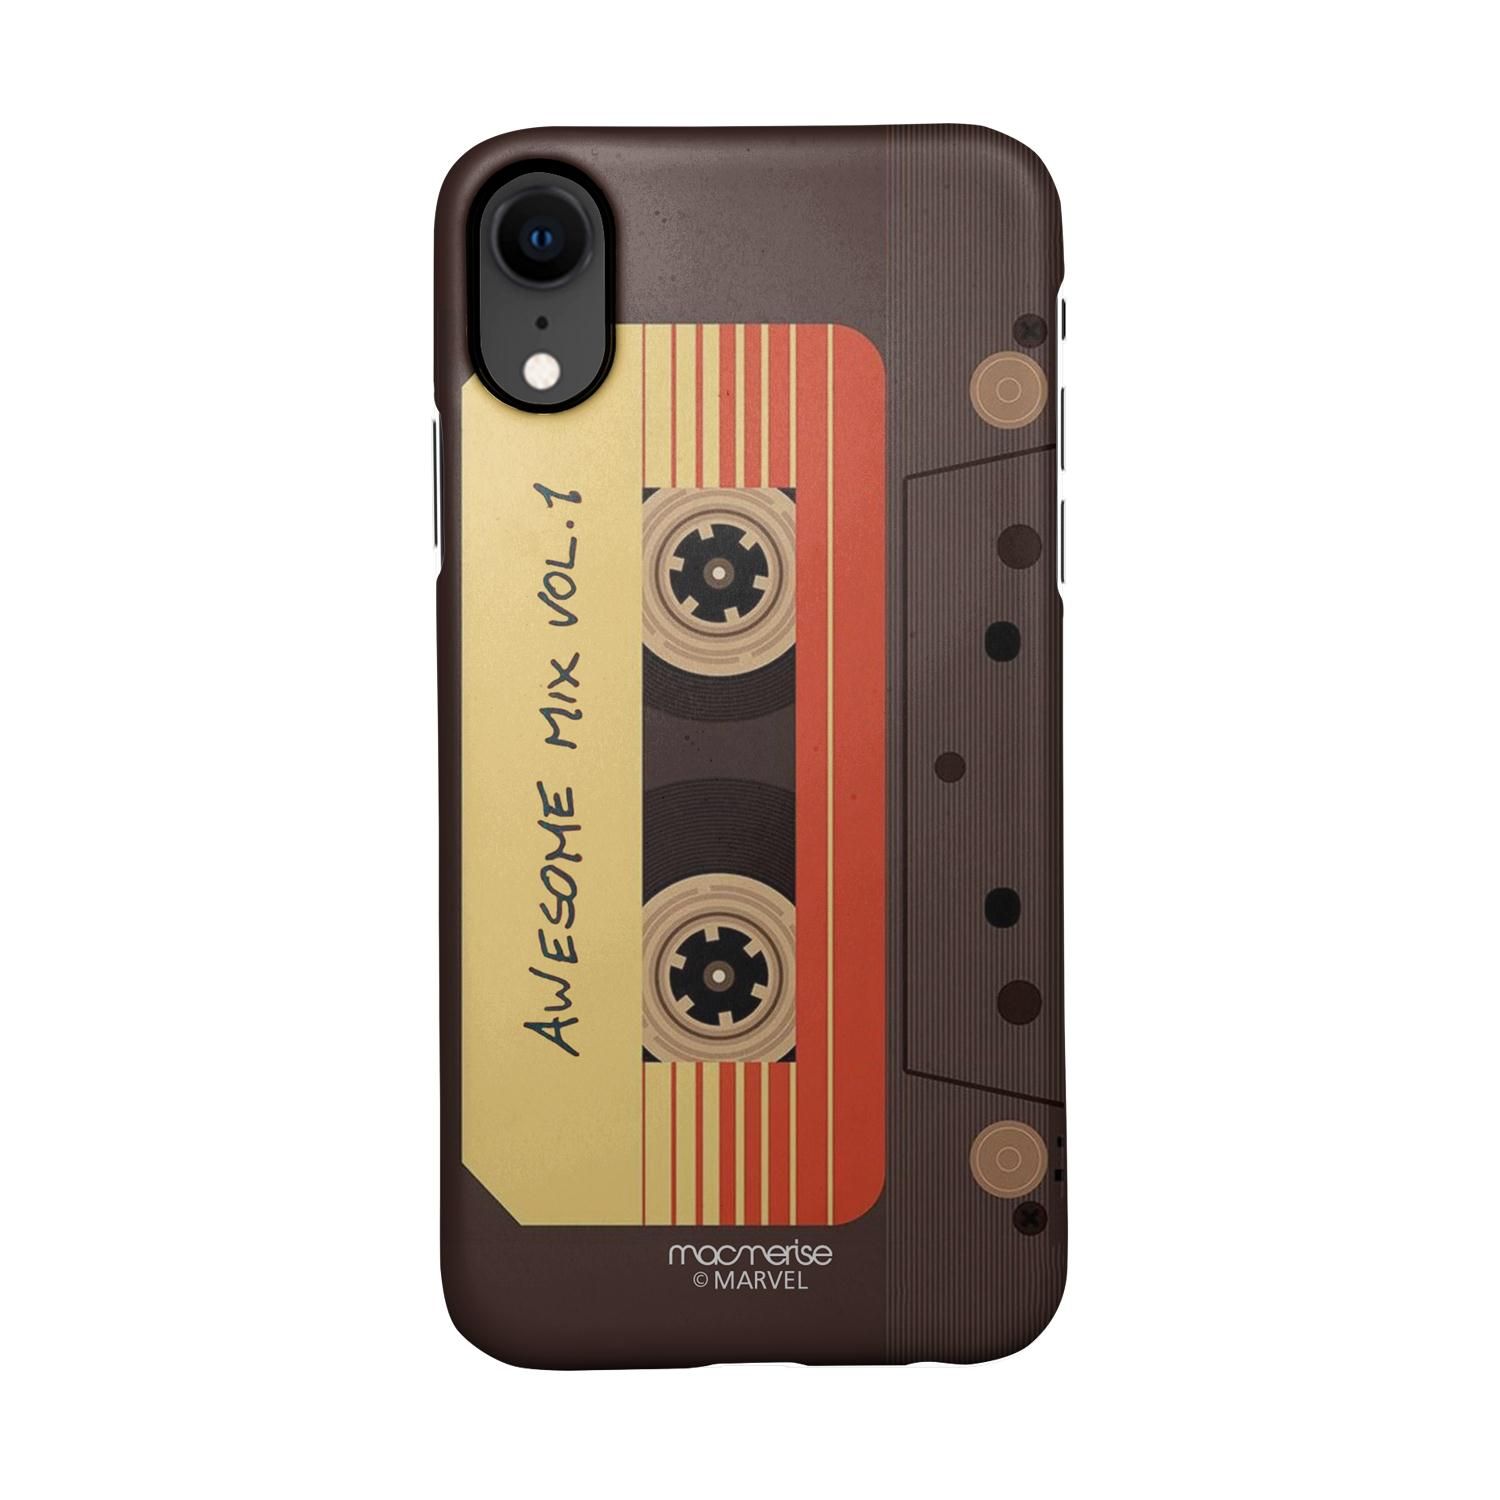 Buy Awesome Mix Tape - Sleek Phone Case for iPhone XR Online